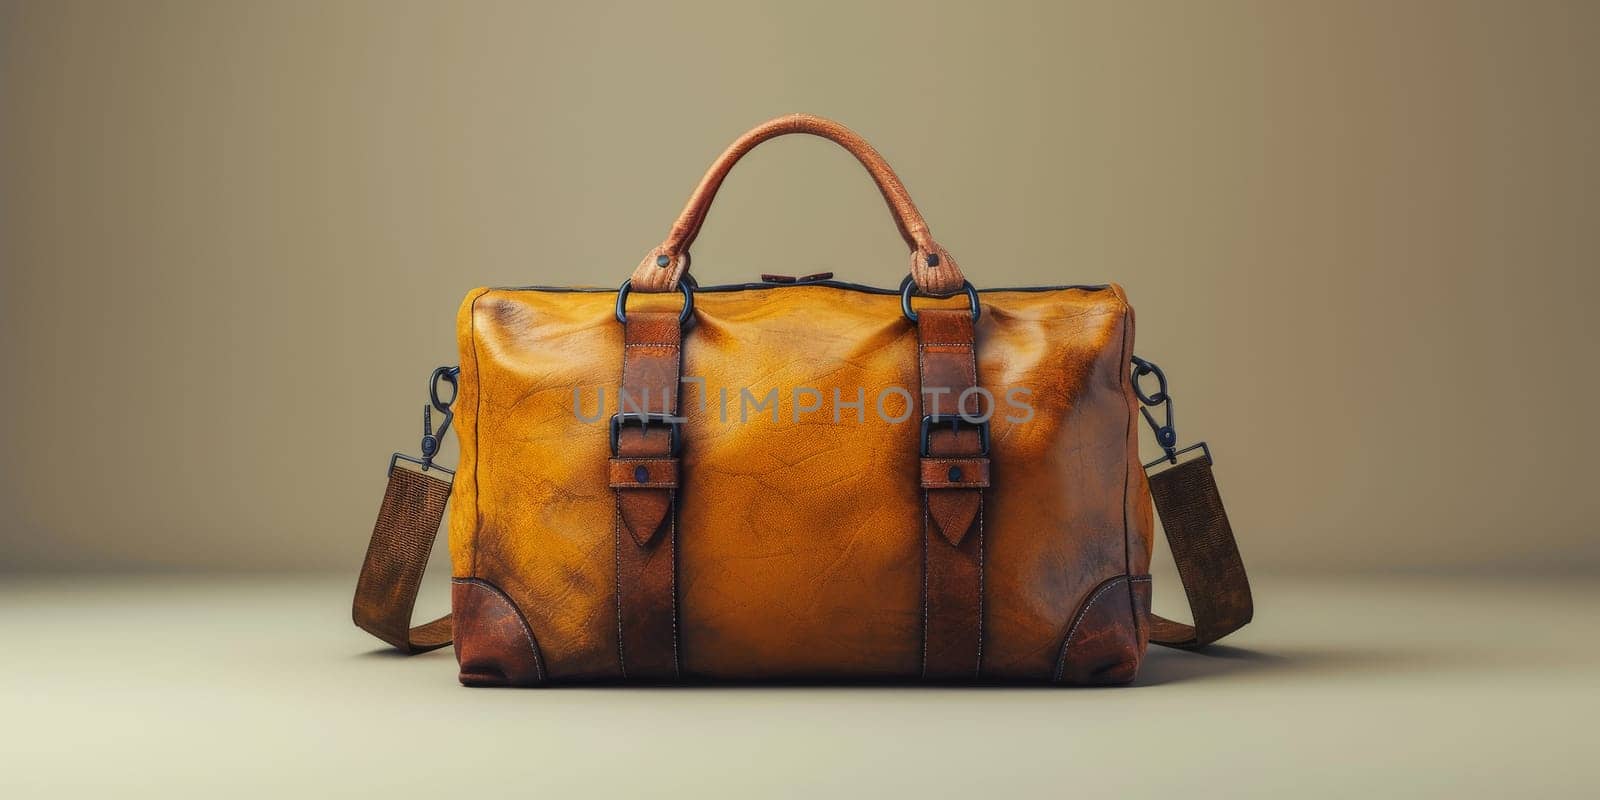 Mockup bag mockup with handles and plain background. by Benzoix